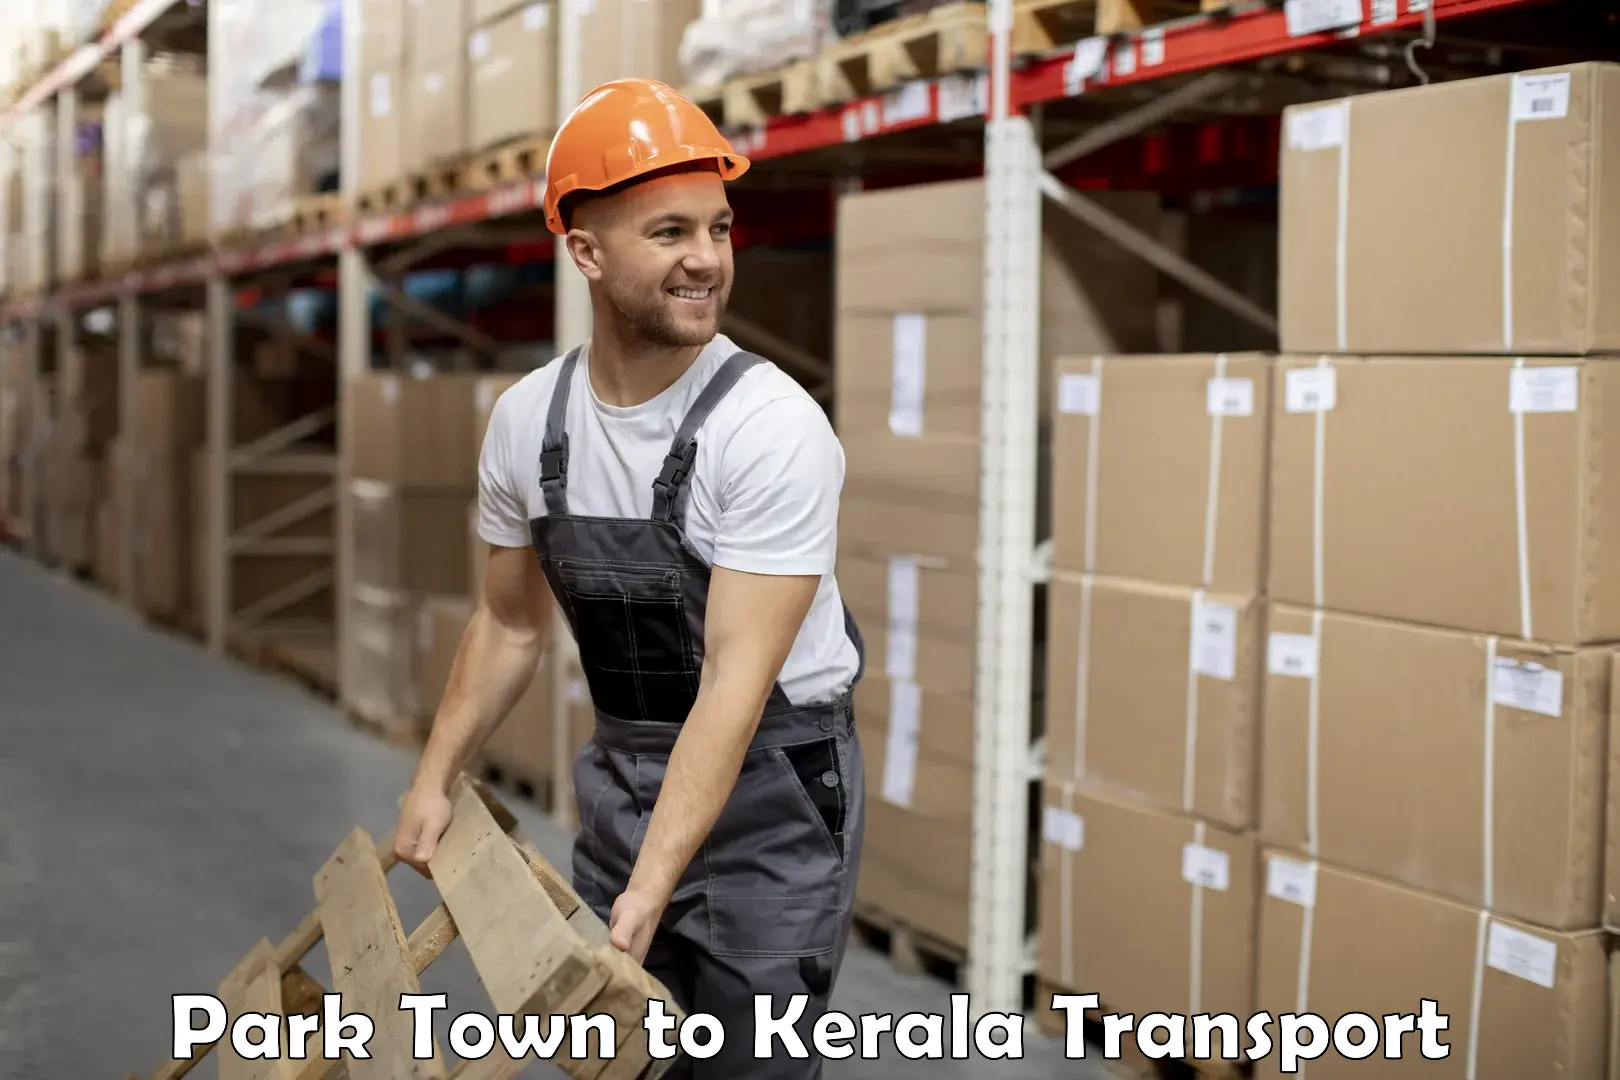 Part load transport service in India Park Town to Cochin Port Kochi